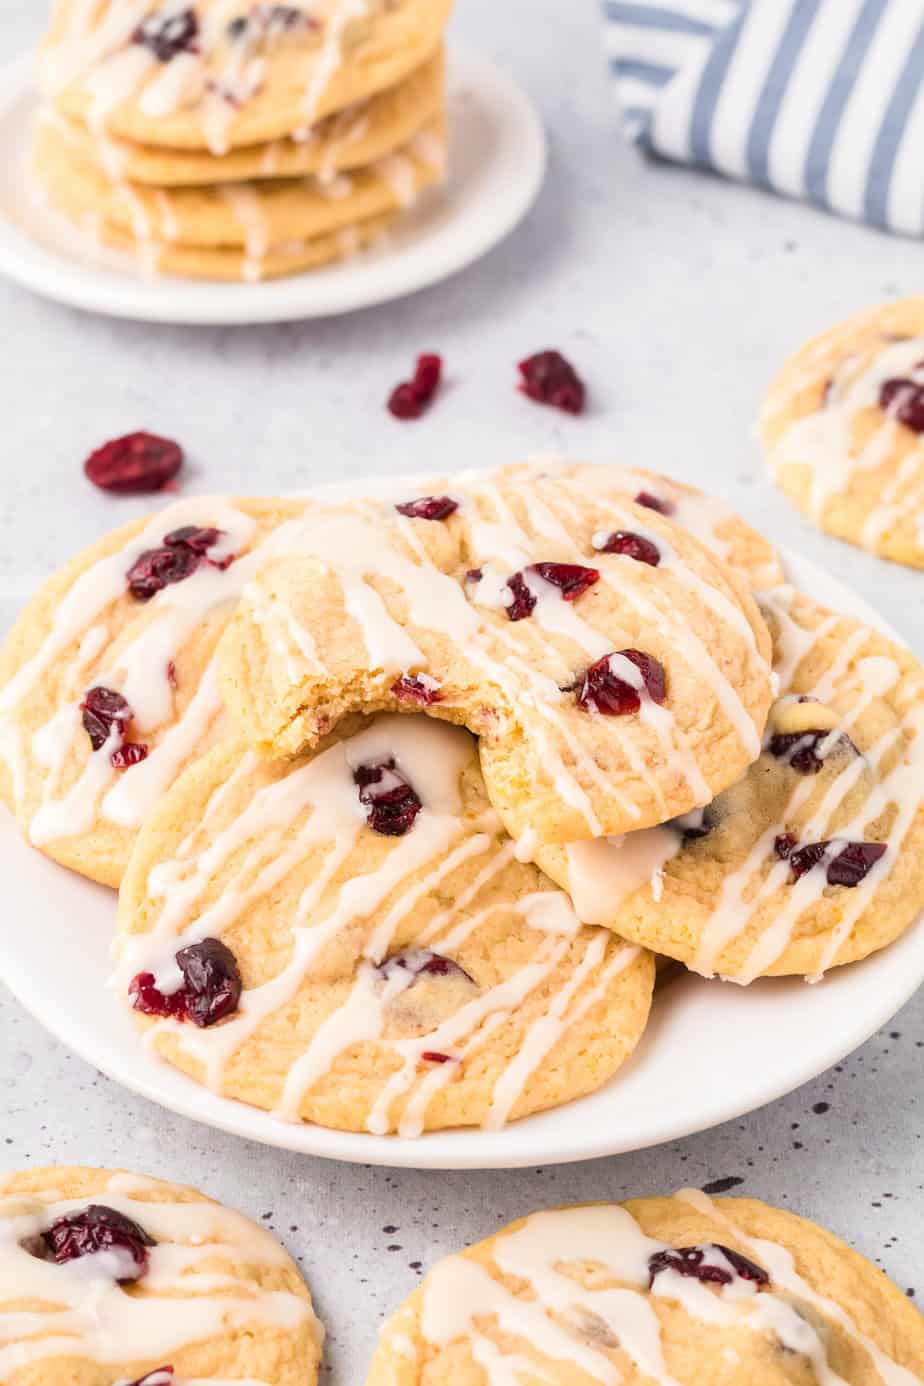 Cookies stacked on a plate on a counter topped with cranberries and glaze, with the top cookie missing a bite.